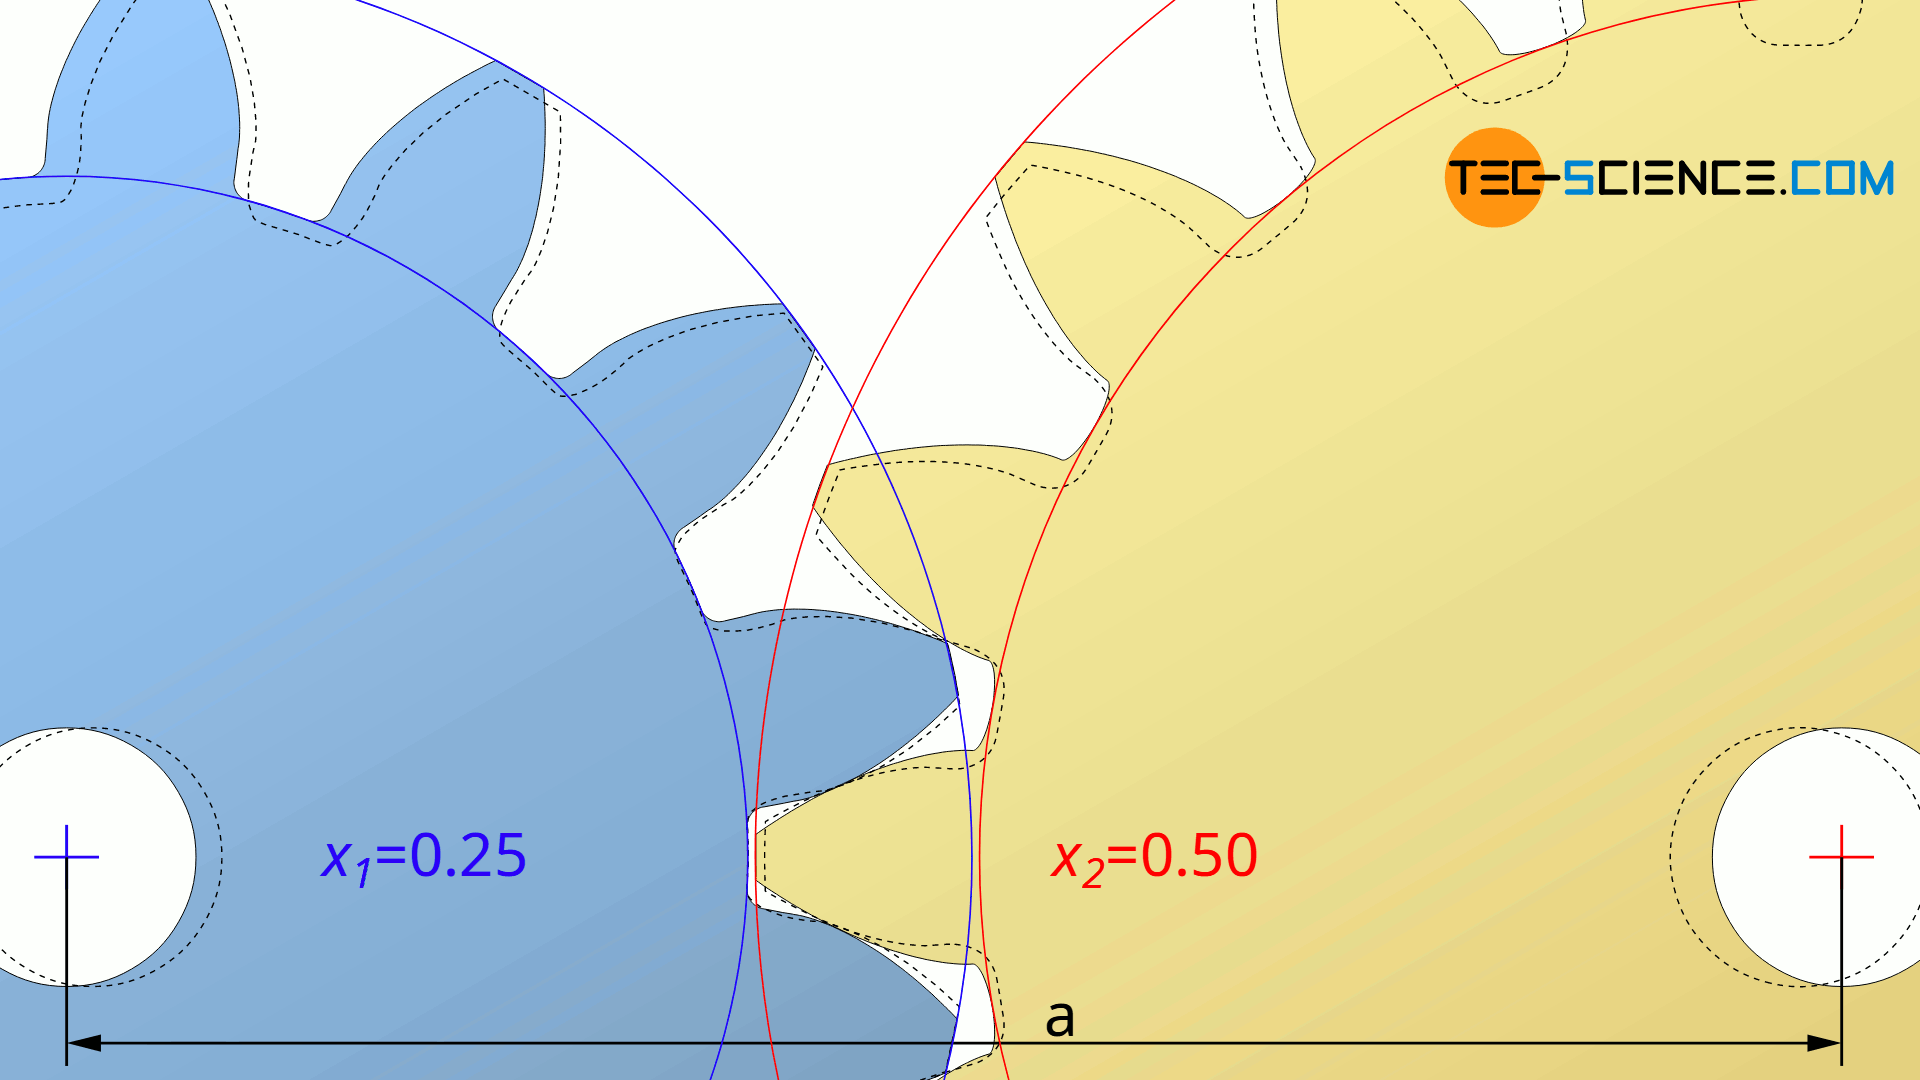 Change of the center distance with a profile shift